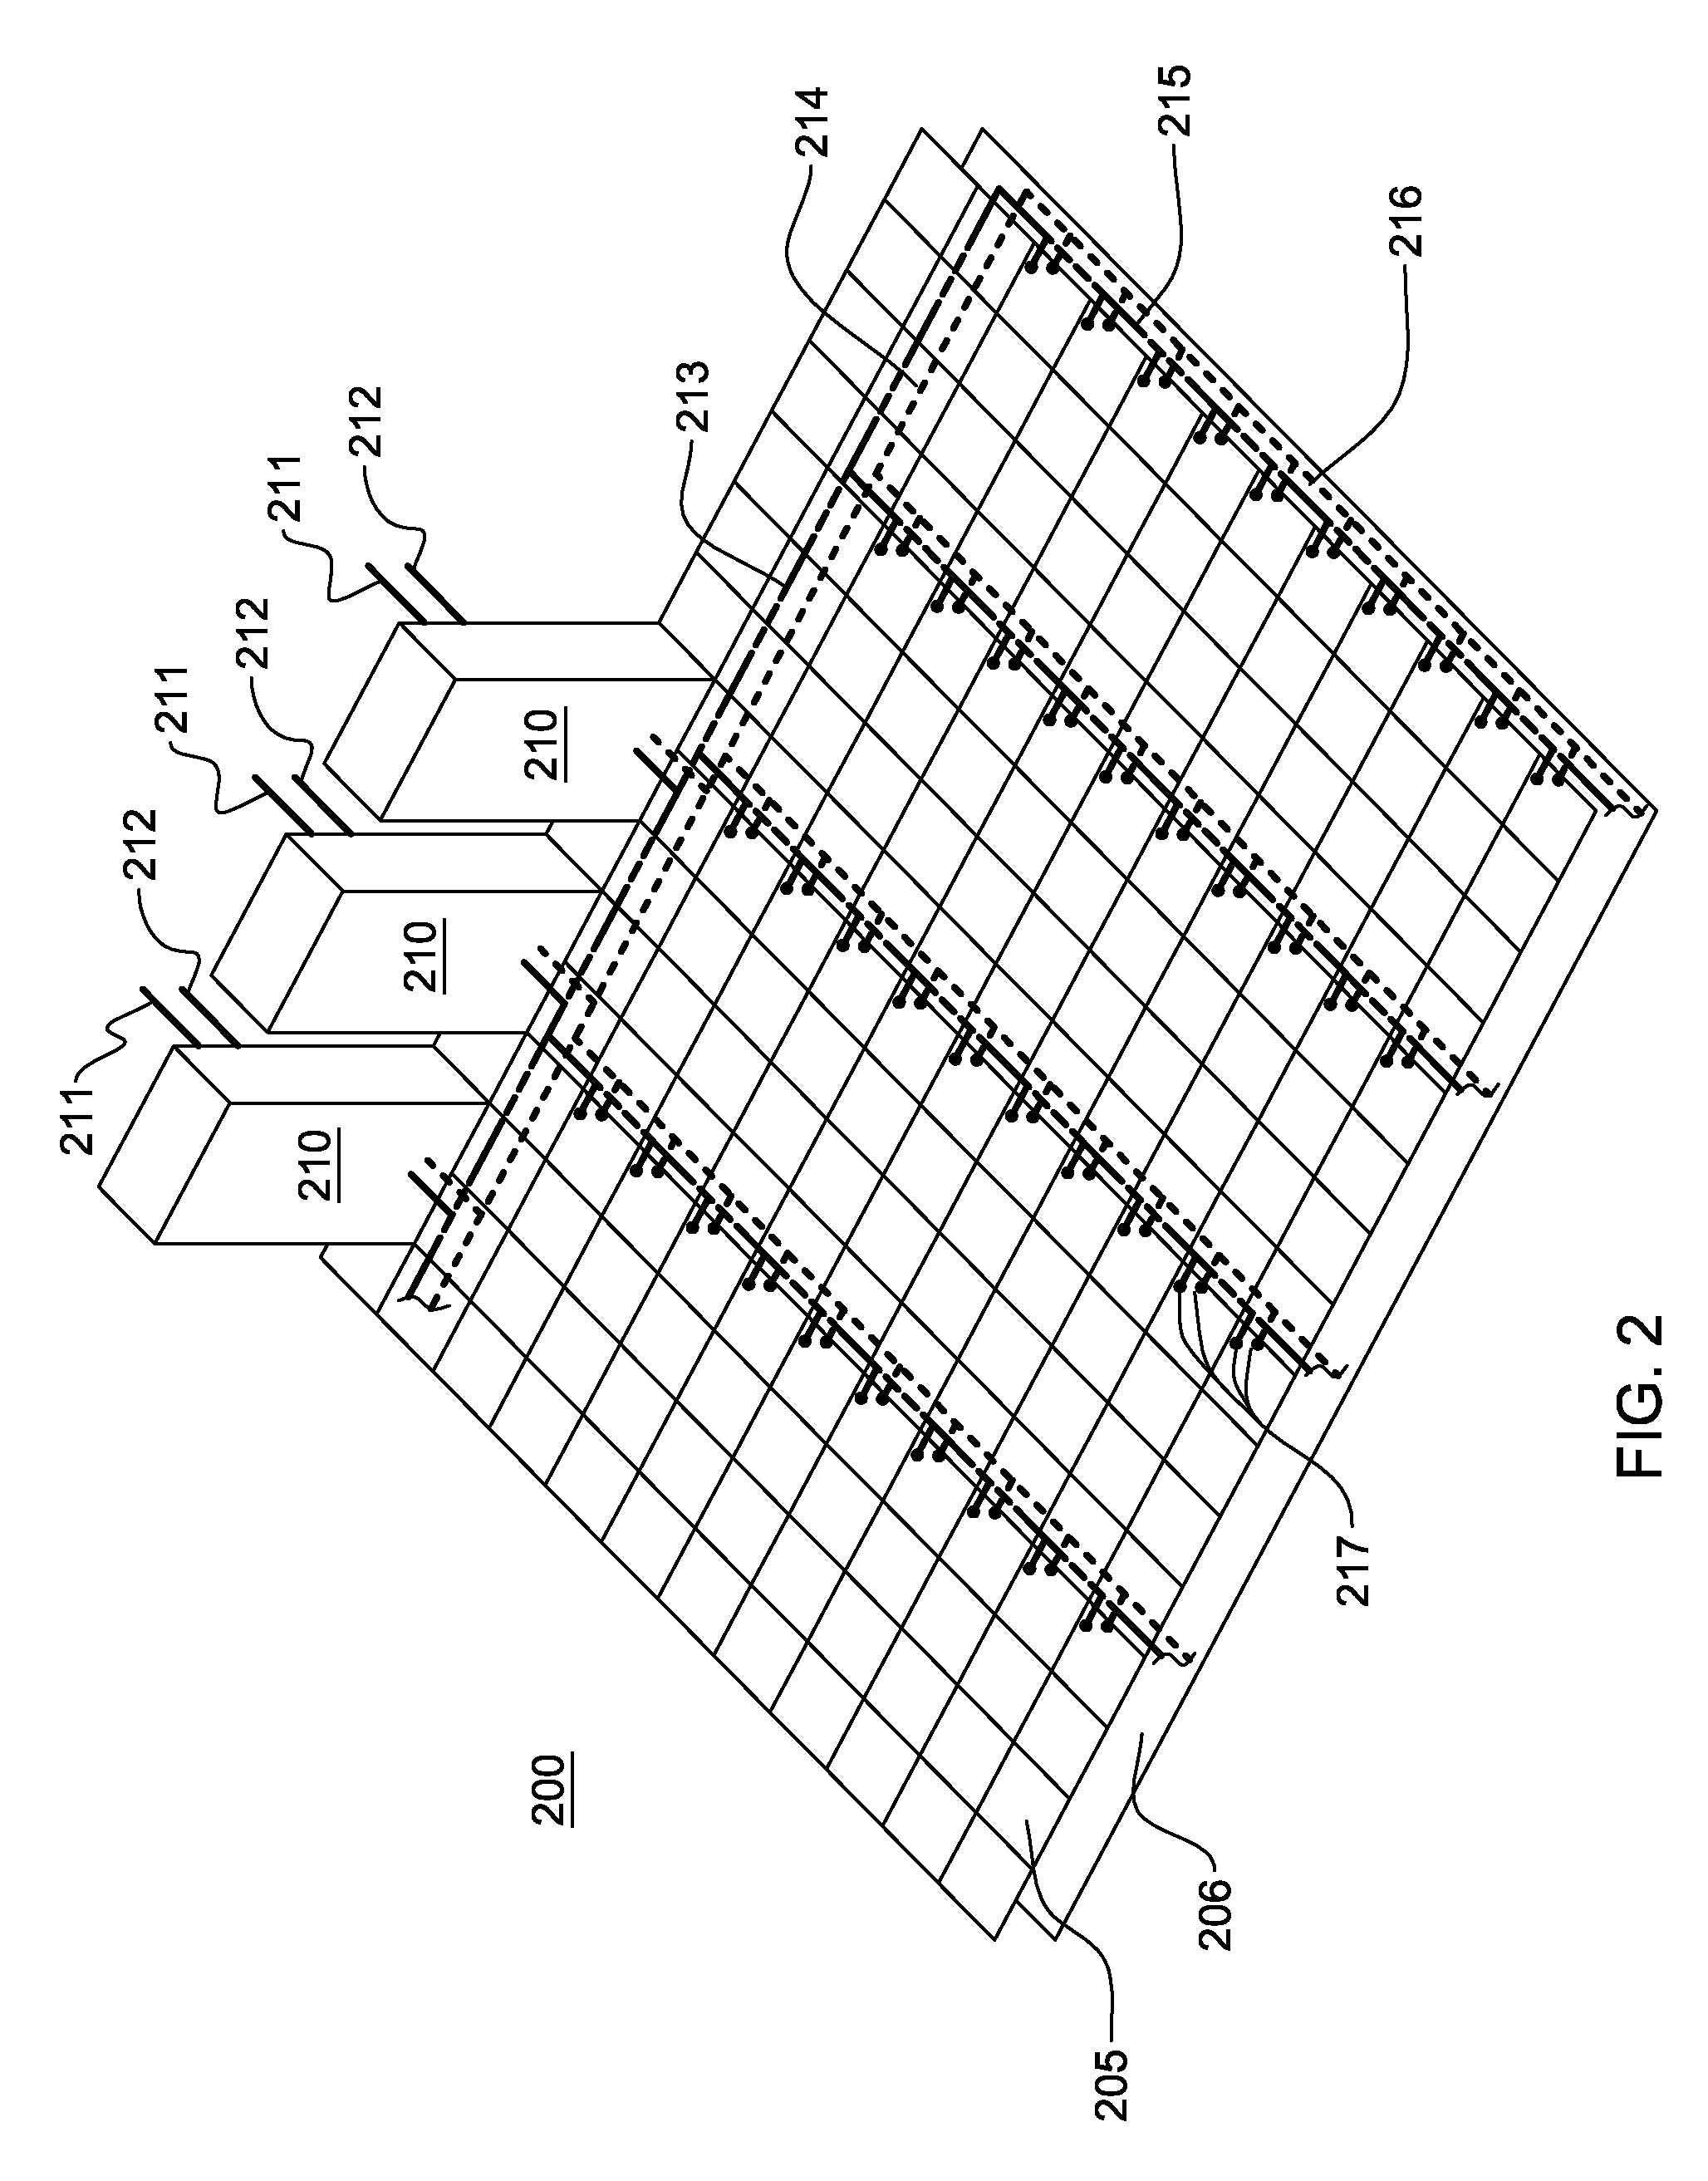 Method of facilitating cooling of electronics racks of a data center employing multiple cooling stations